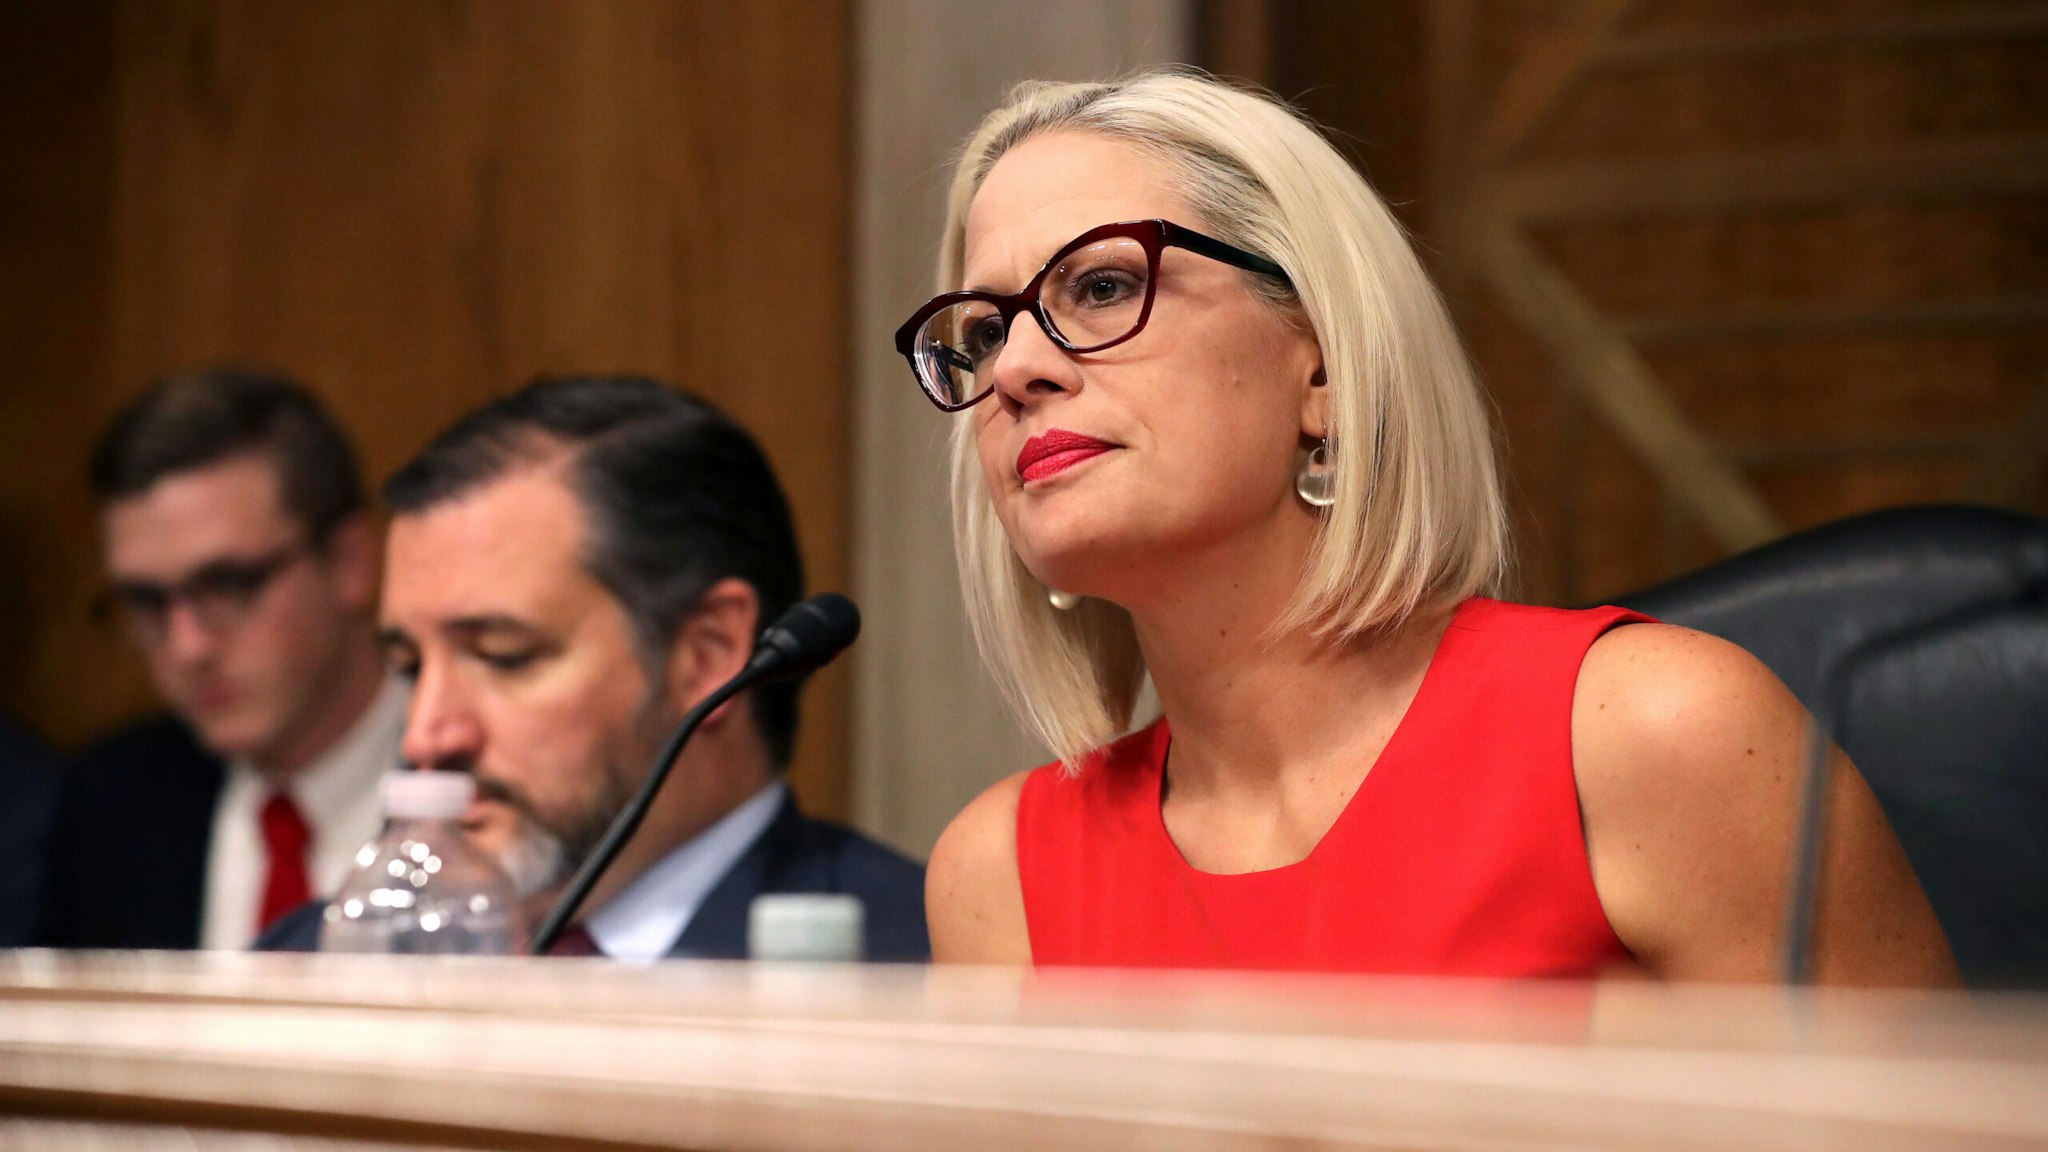 WASHINGTON, DC - MAY 14: Senate Aviation and Space Subcommittee ranking member Sen. Kyrsten Sinema questions witnesses during a hearing in the Dirksen Senate Office Building on Capitol Hill on May 14, 2019 in Washington, DC. In the wake of President Donald Trump's orders to create a military Space Force, NASA Administrator Jim Bridenstine testified about "The Emerging Space Environment: Operational, Technical, and Policy Challenges."